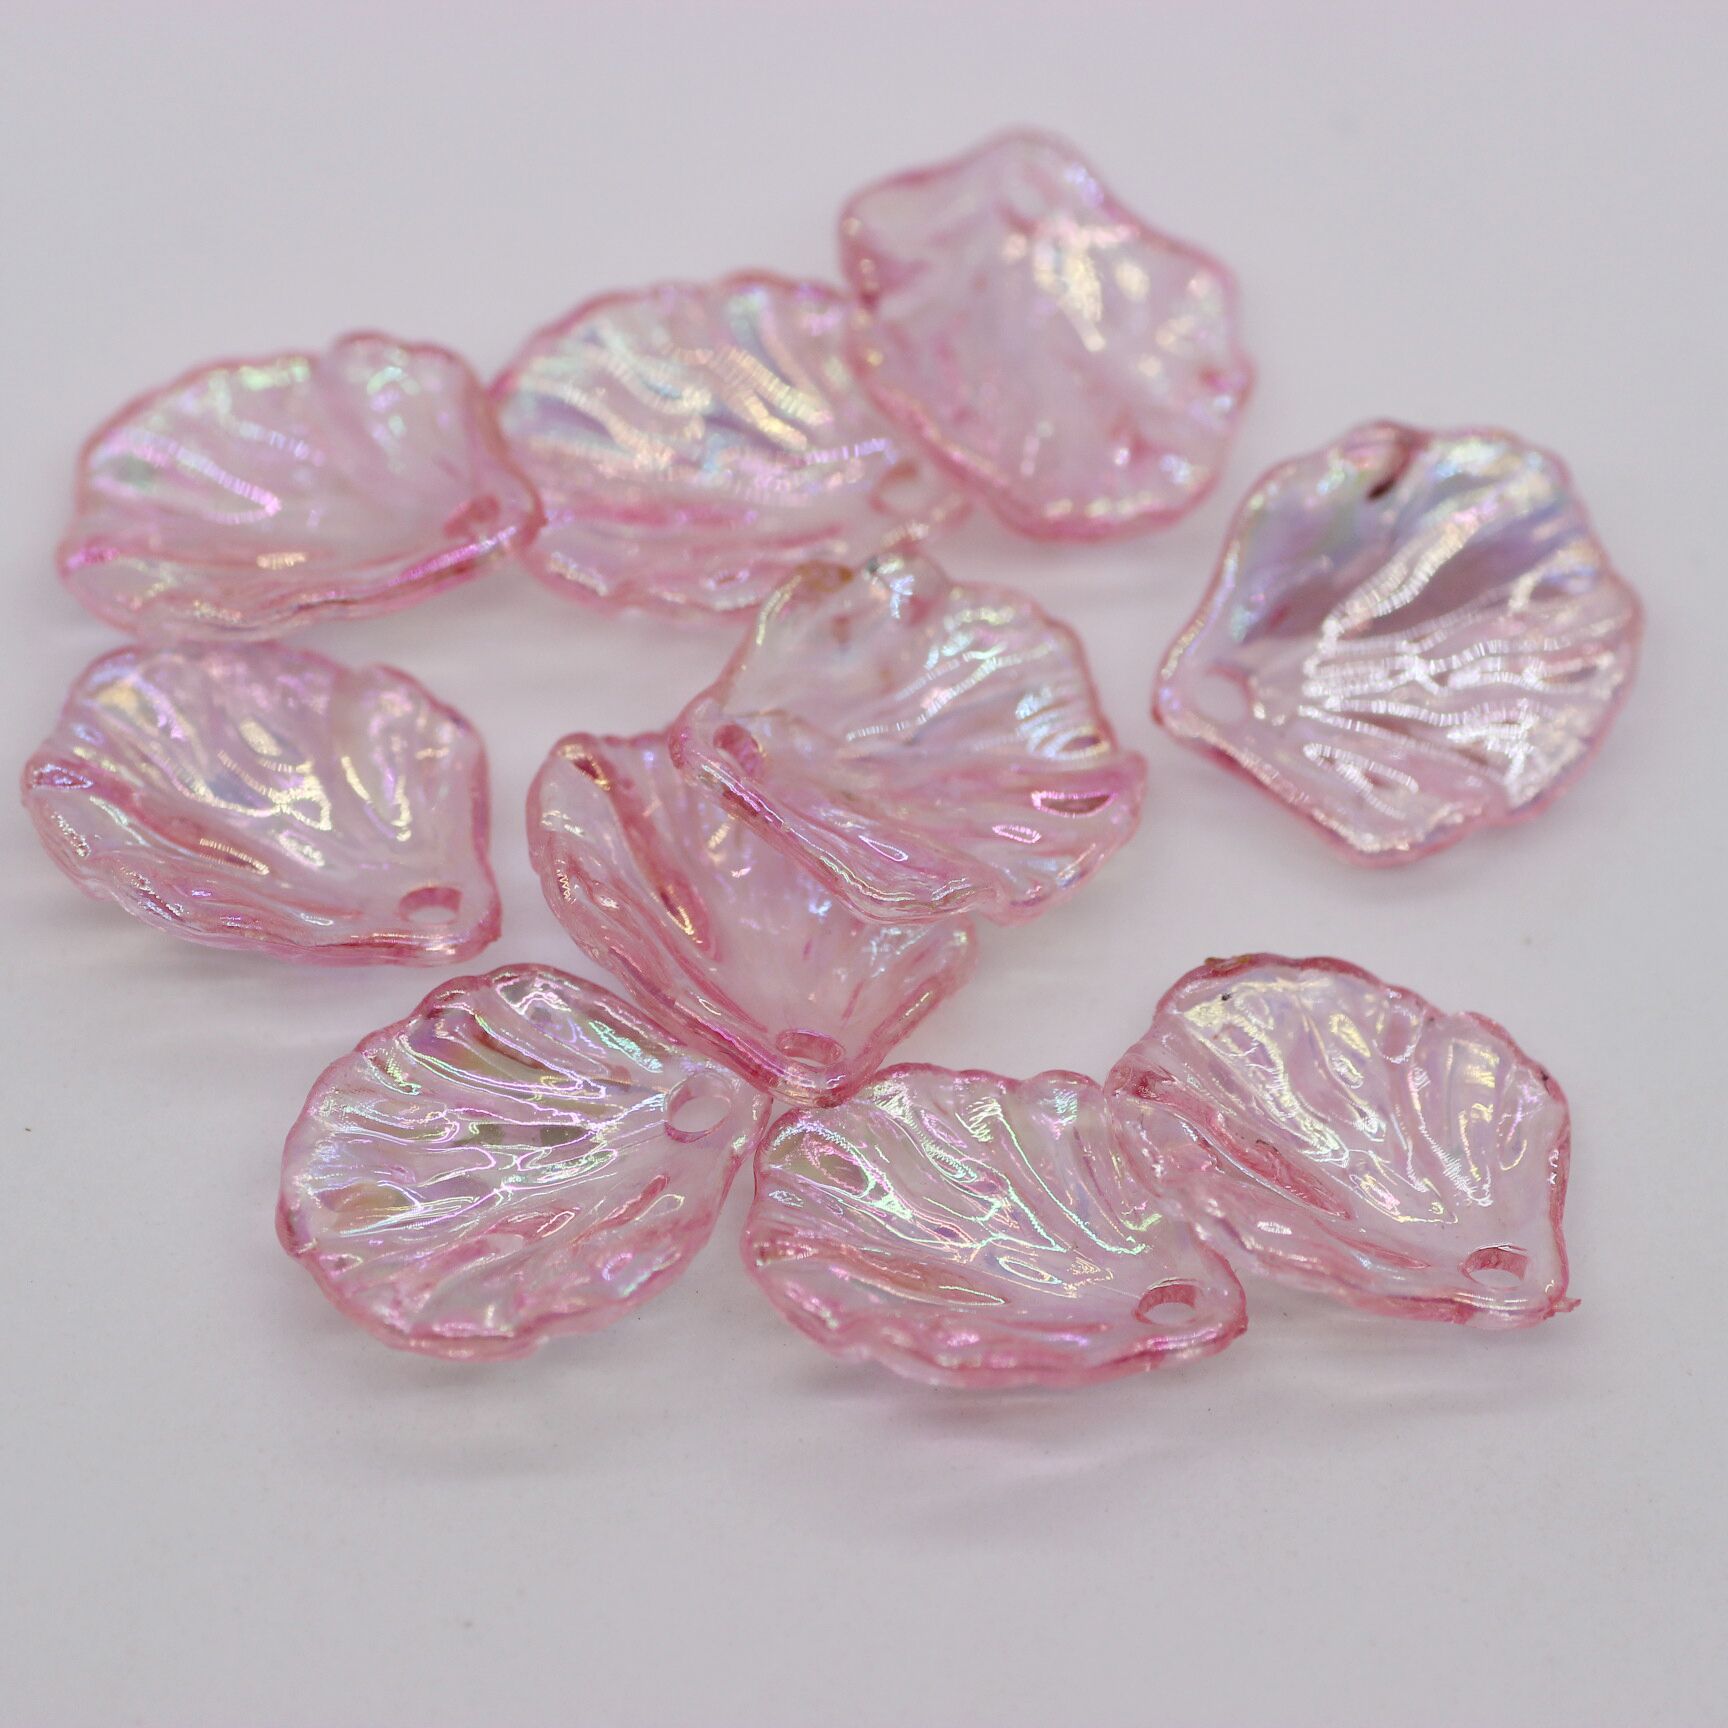 Small 15 x 17 mm clear pink